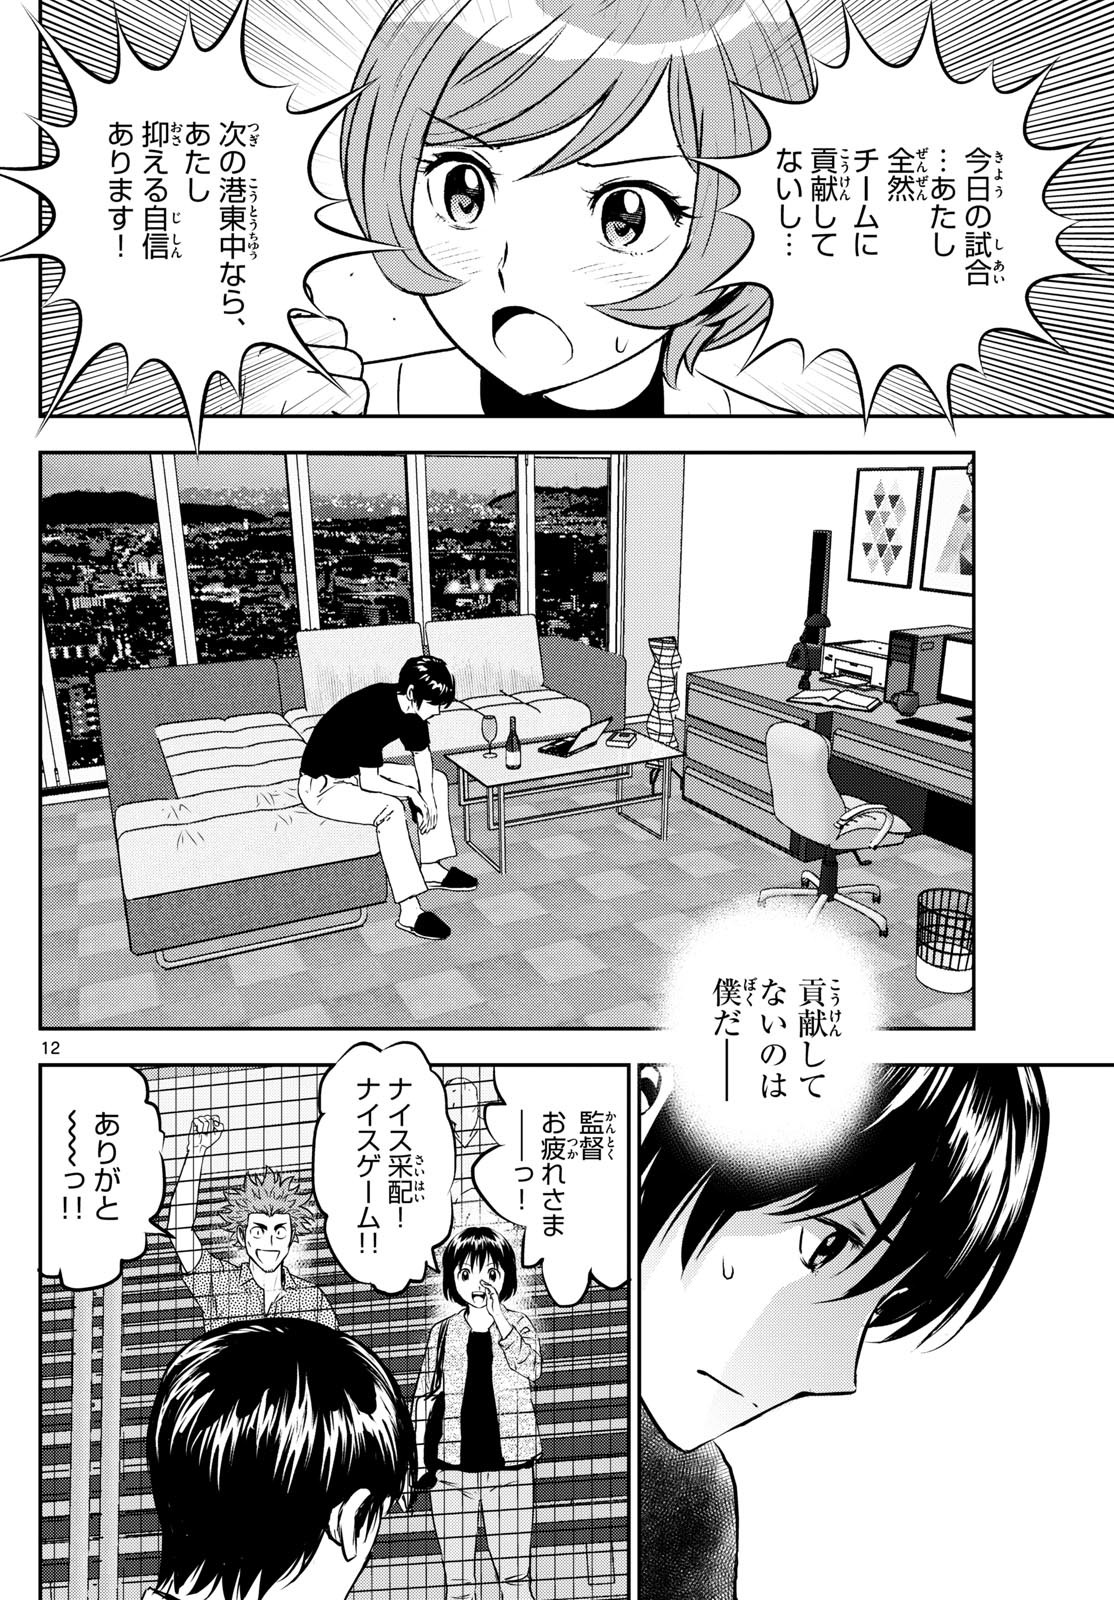 Major 2nd - メジャーセカンド - Chapter 278 - Page 12